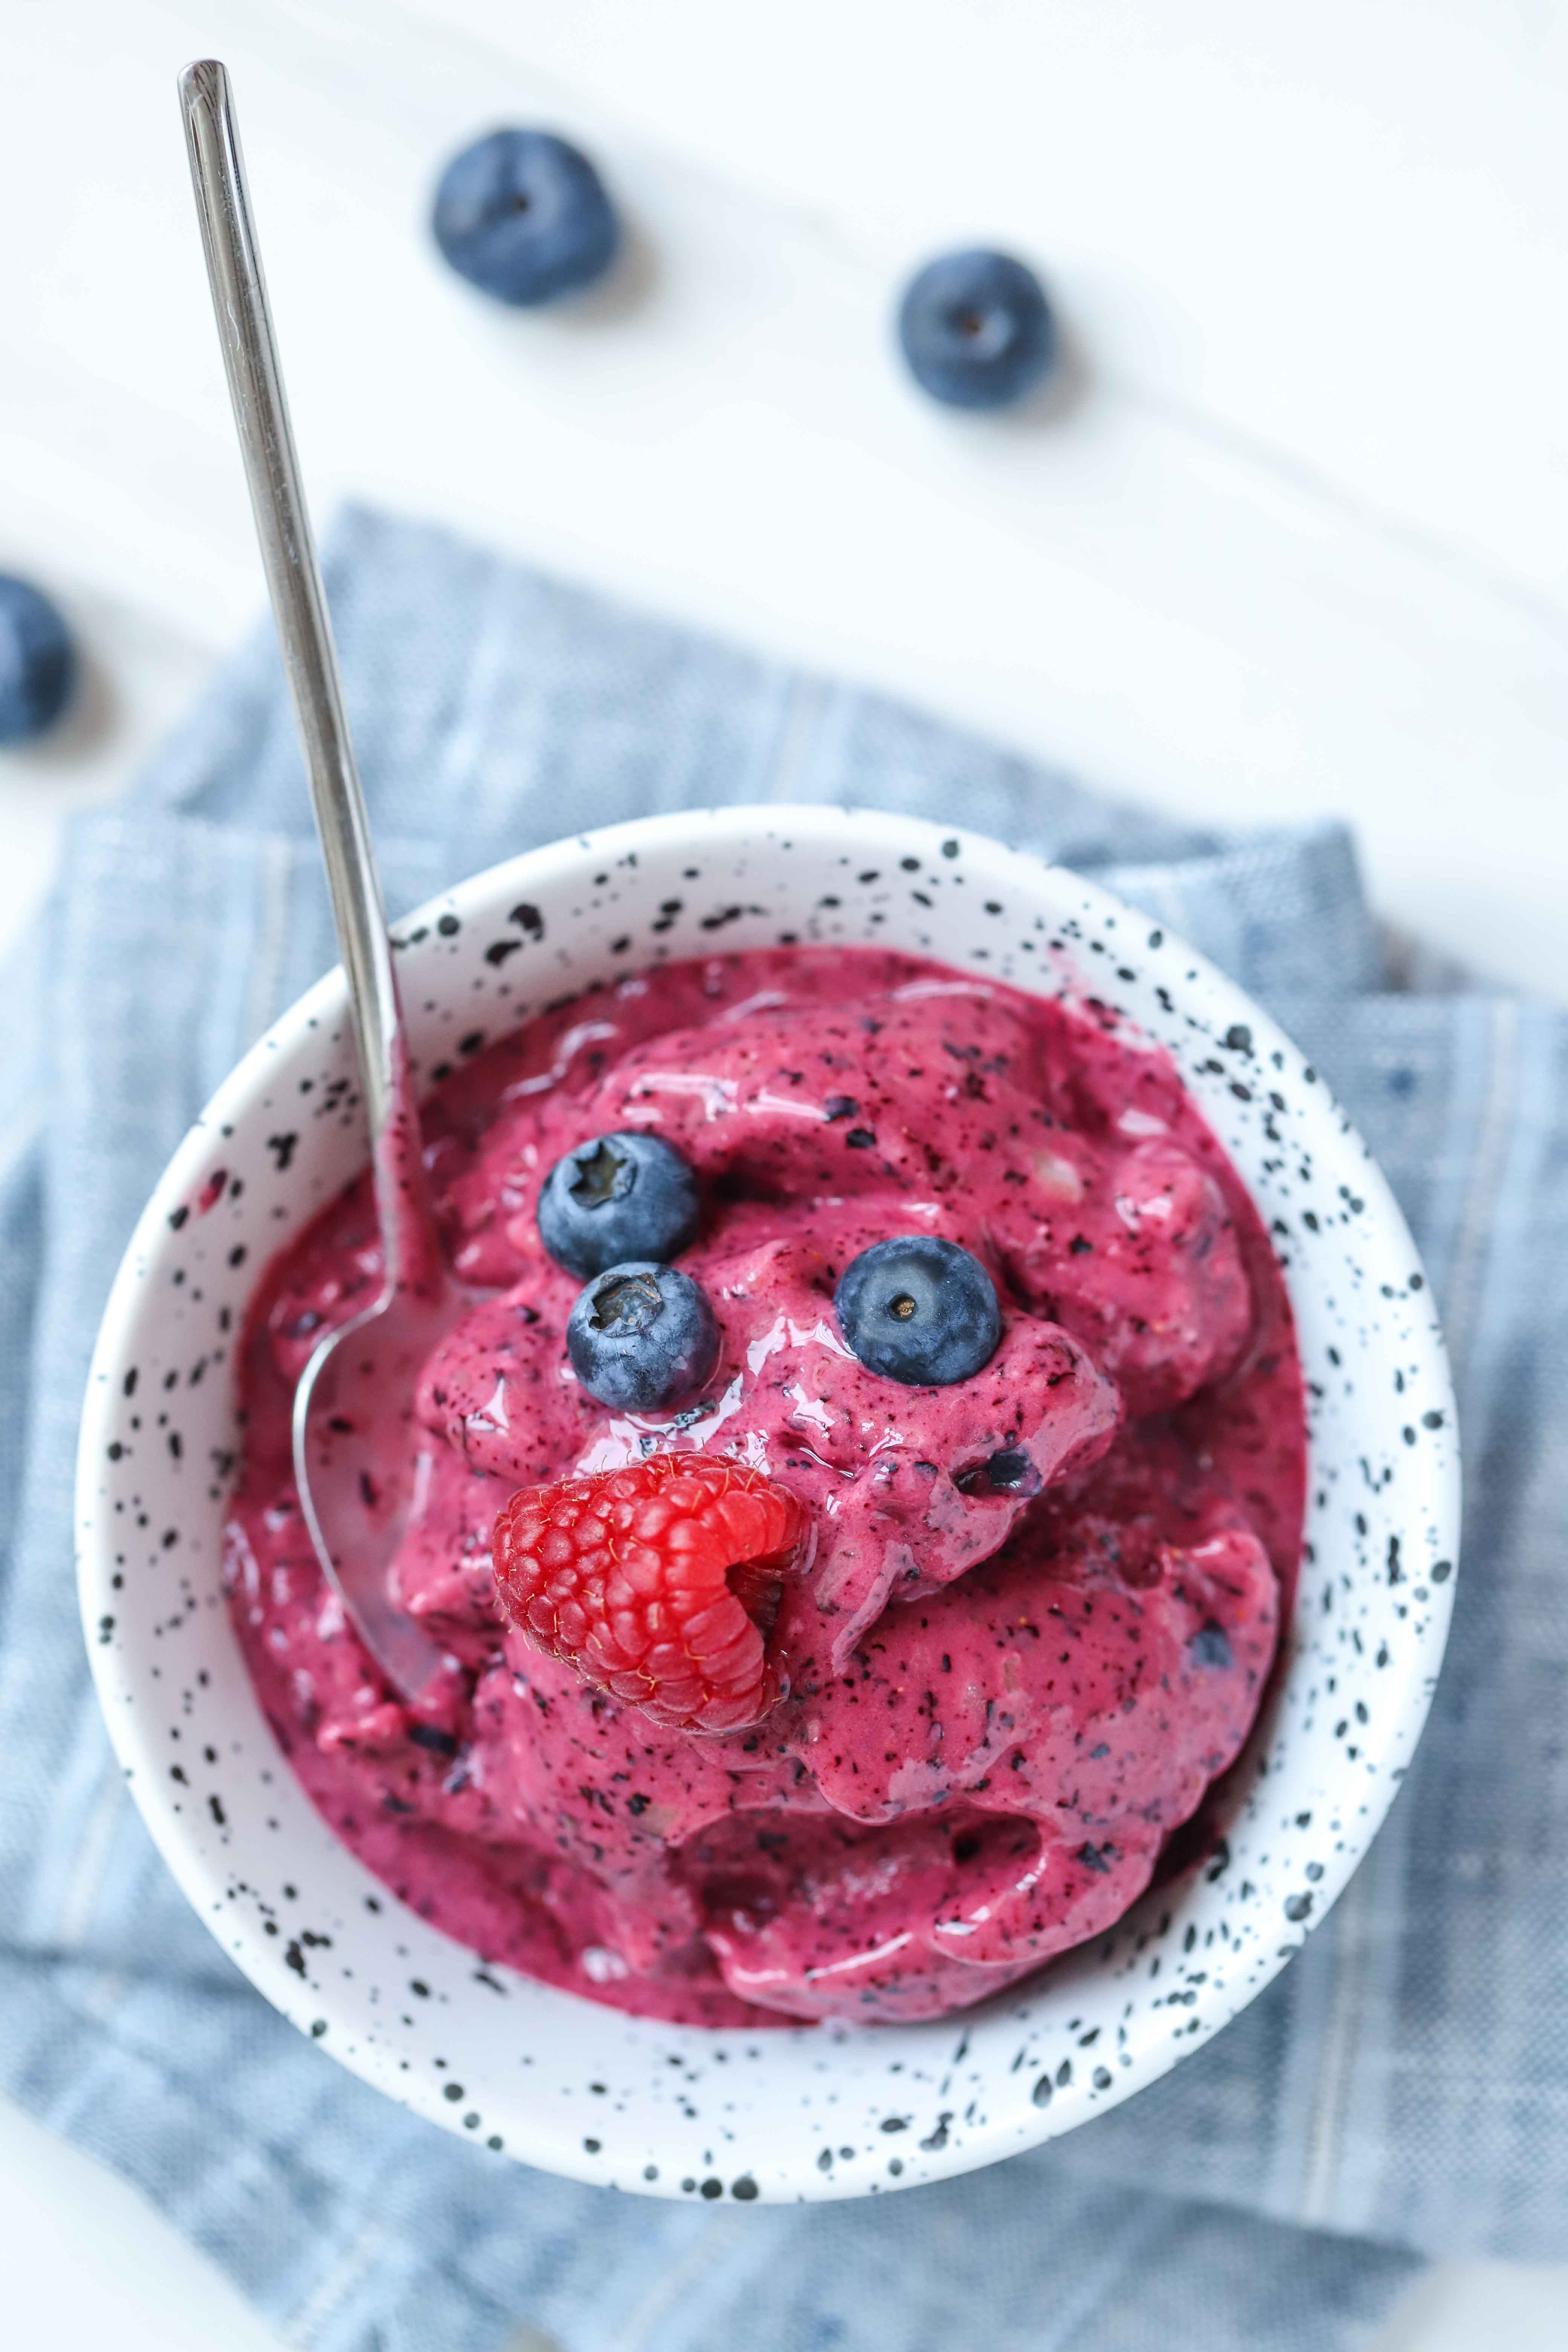 Frozen blueberry yogurt...as easy as turning on the blender. Serve with your favourite toppings.